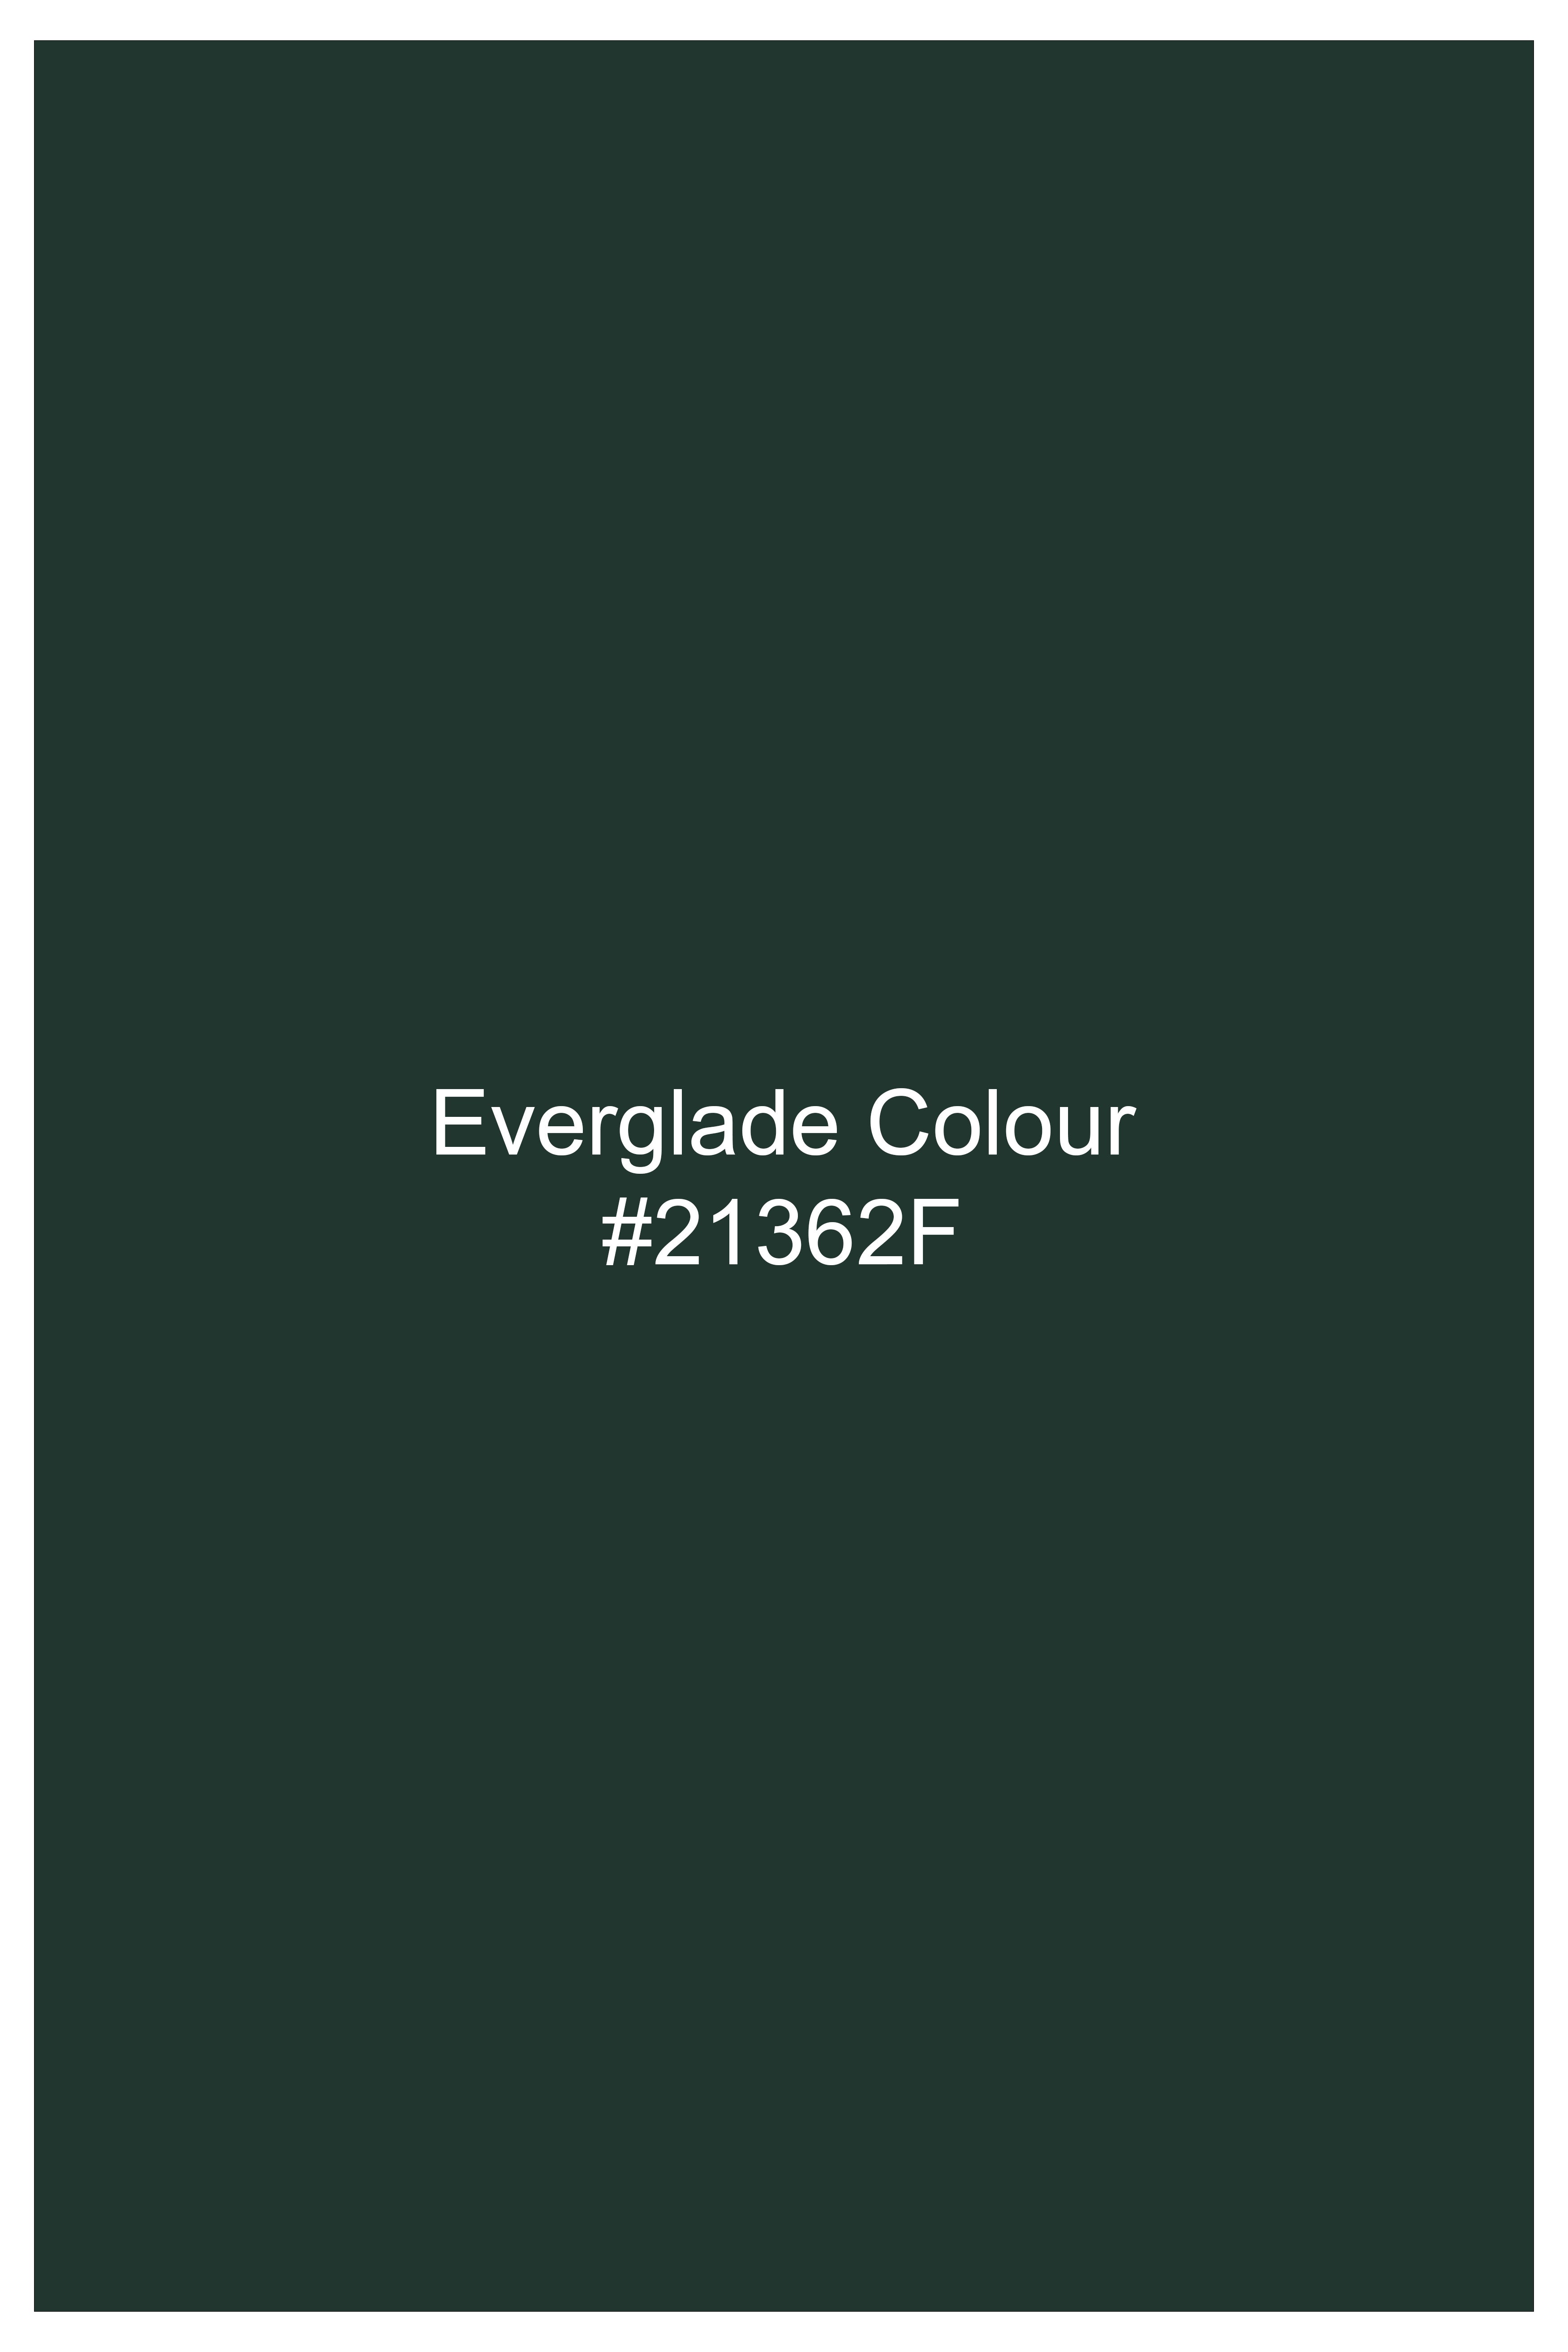 Everglade Green Micro Checkered Wool Rich Suit